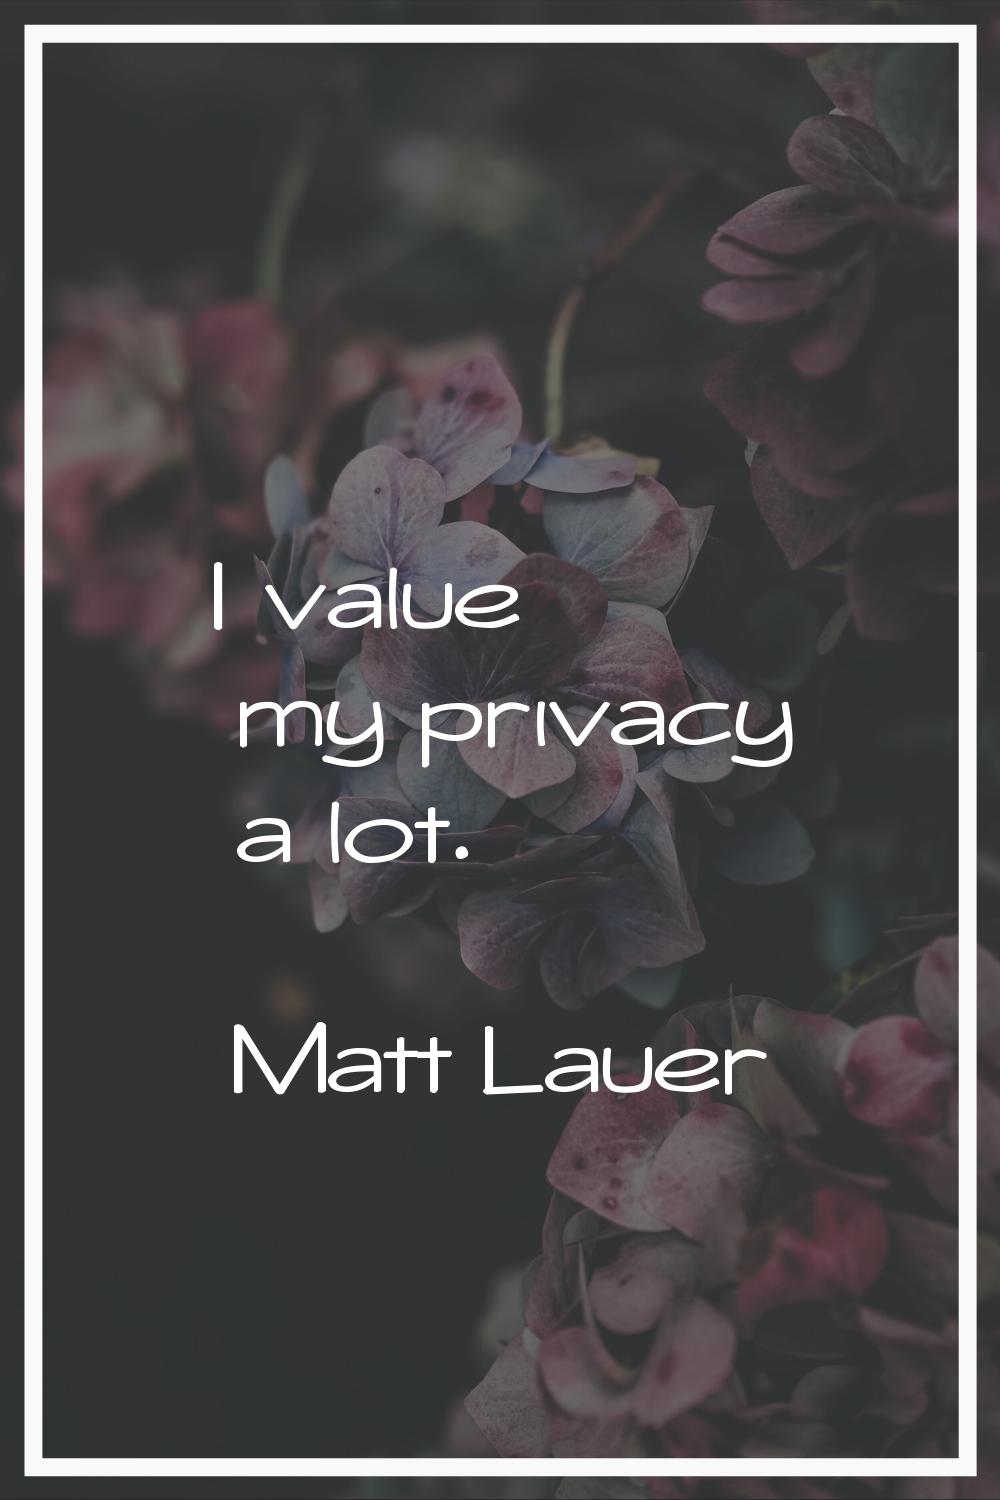 I value my privacy a lot.